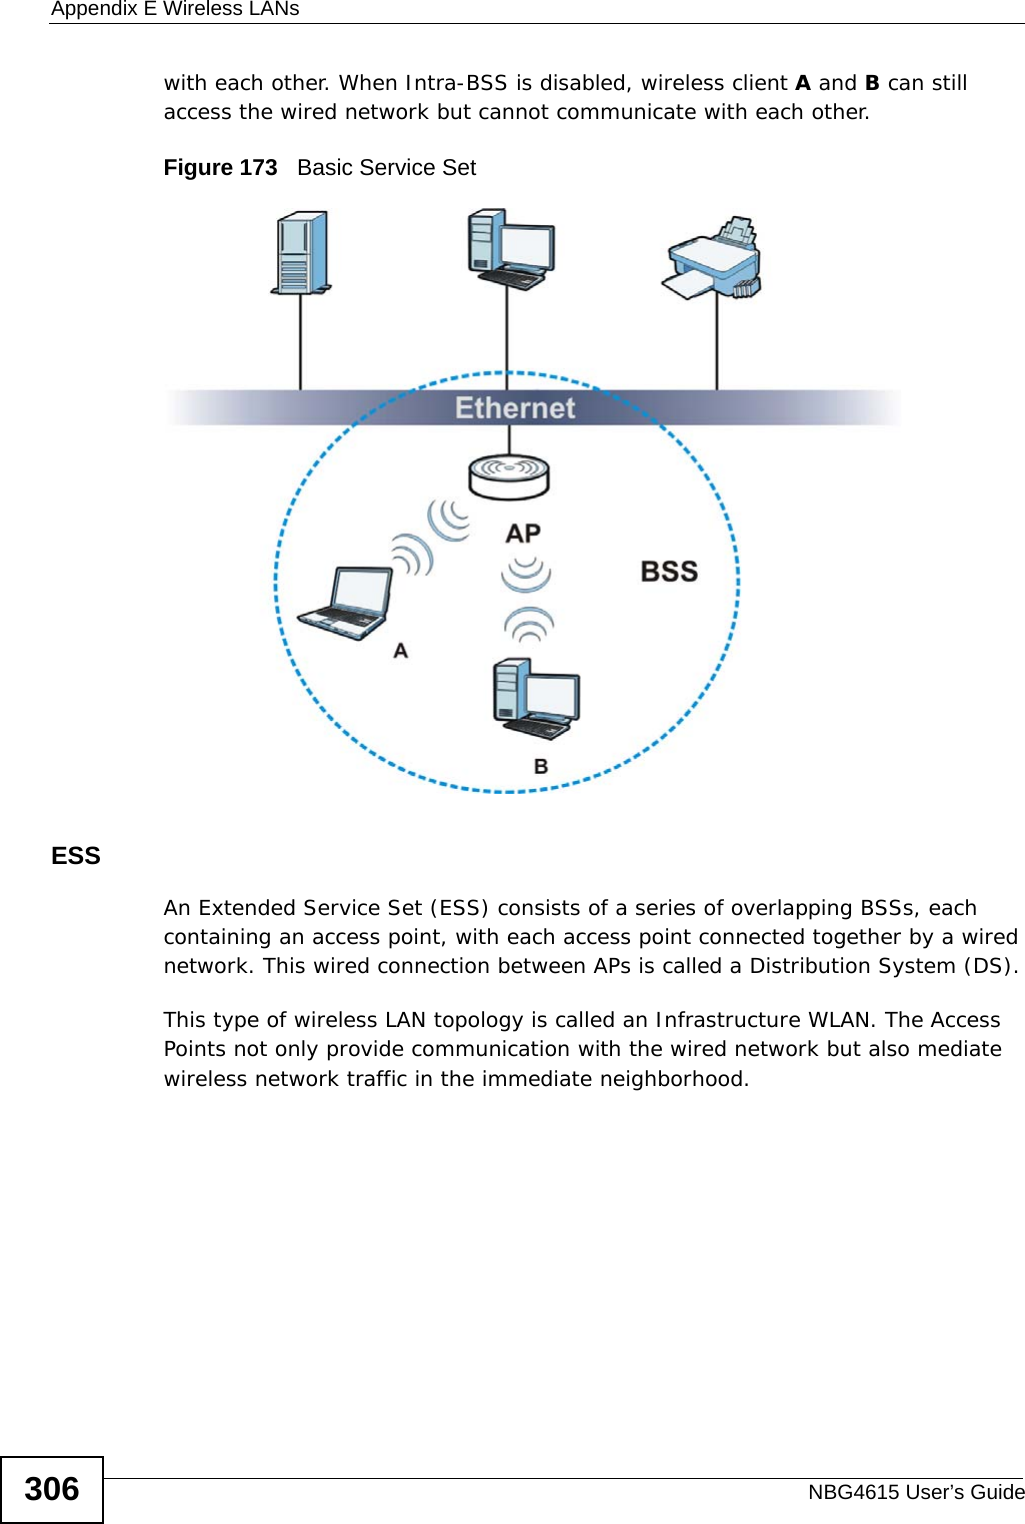 Appendix E Wireless LANsNBG4615 User’s Guide306with each other. When Intra-BSS is disabled, wireless client A and B can still access the wired network but cannot communicate with each other.Figure 173   Basic Service SetESSAn Extended Service Set (ESS) consists of a series of overlapping BSSs, each containing an access point, with each access point connected together by a wired network. This wired connection between APs is called a Distribution System (DS).This type of wireless LAN topology is called an Infrastructure WLAN. The Access Points not only provide communication with the wired network but also mediate wireless network traffic in the immediate neighborhood. 